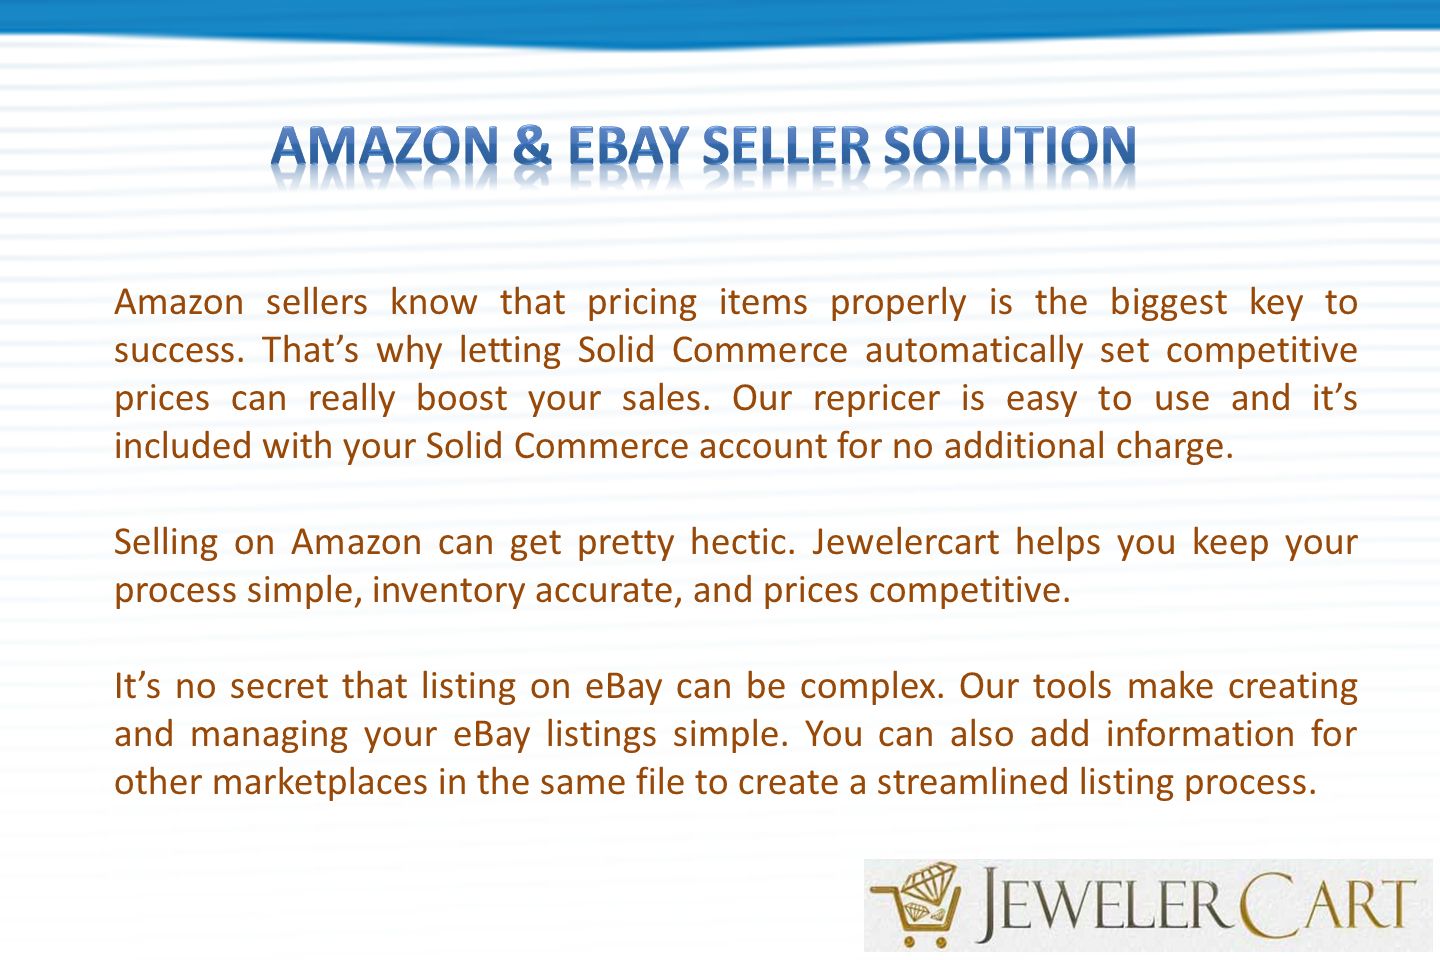 Amazon sellers know that pricing items properly is the biggest key to success.